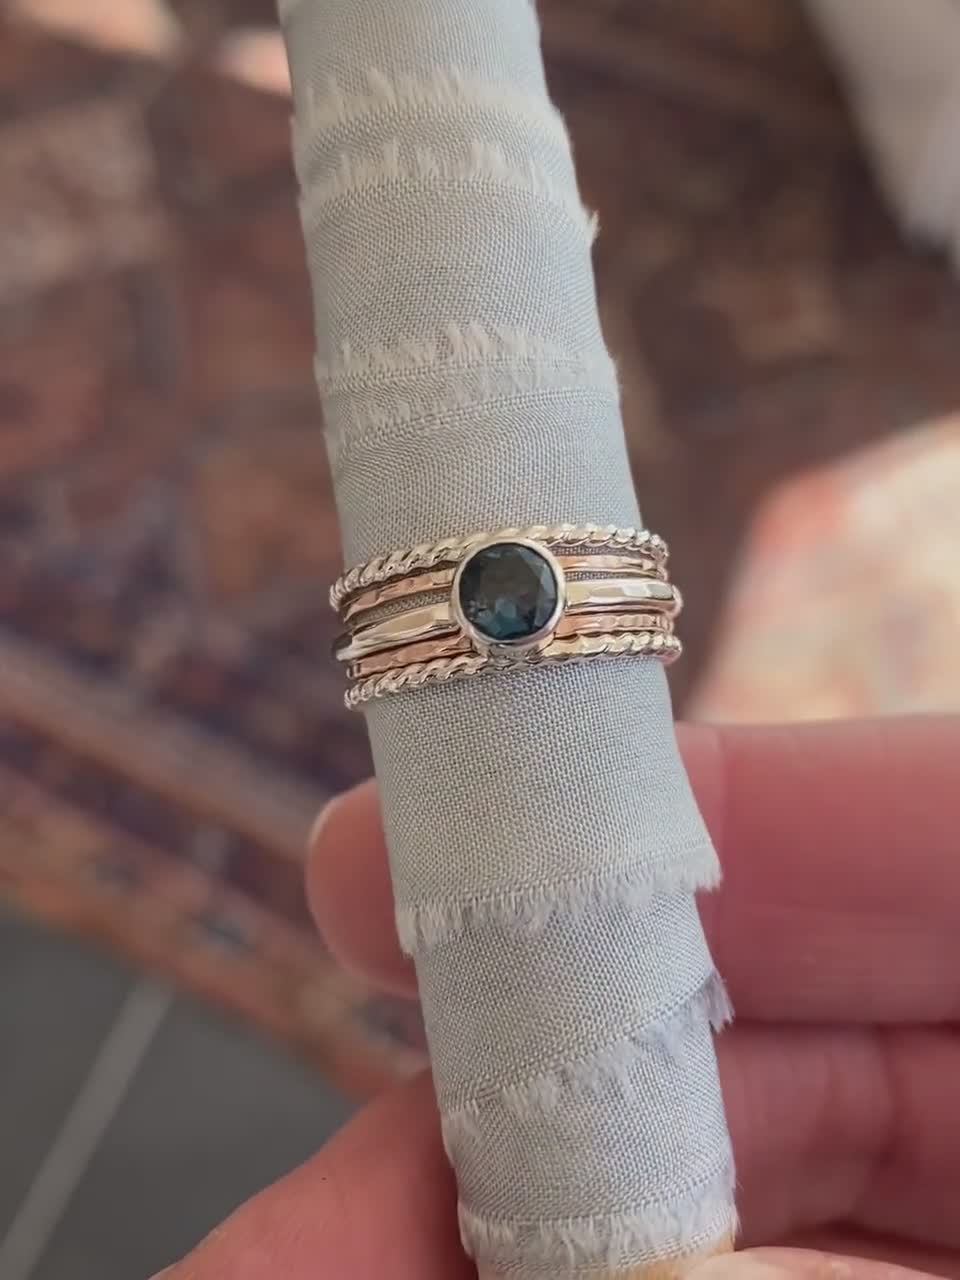 Topaz Stacking Rings Set of Five, Your Choice Gemstone Blue White Green,  Mixed Metal Silver and Gold Rings - Etsy